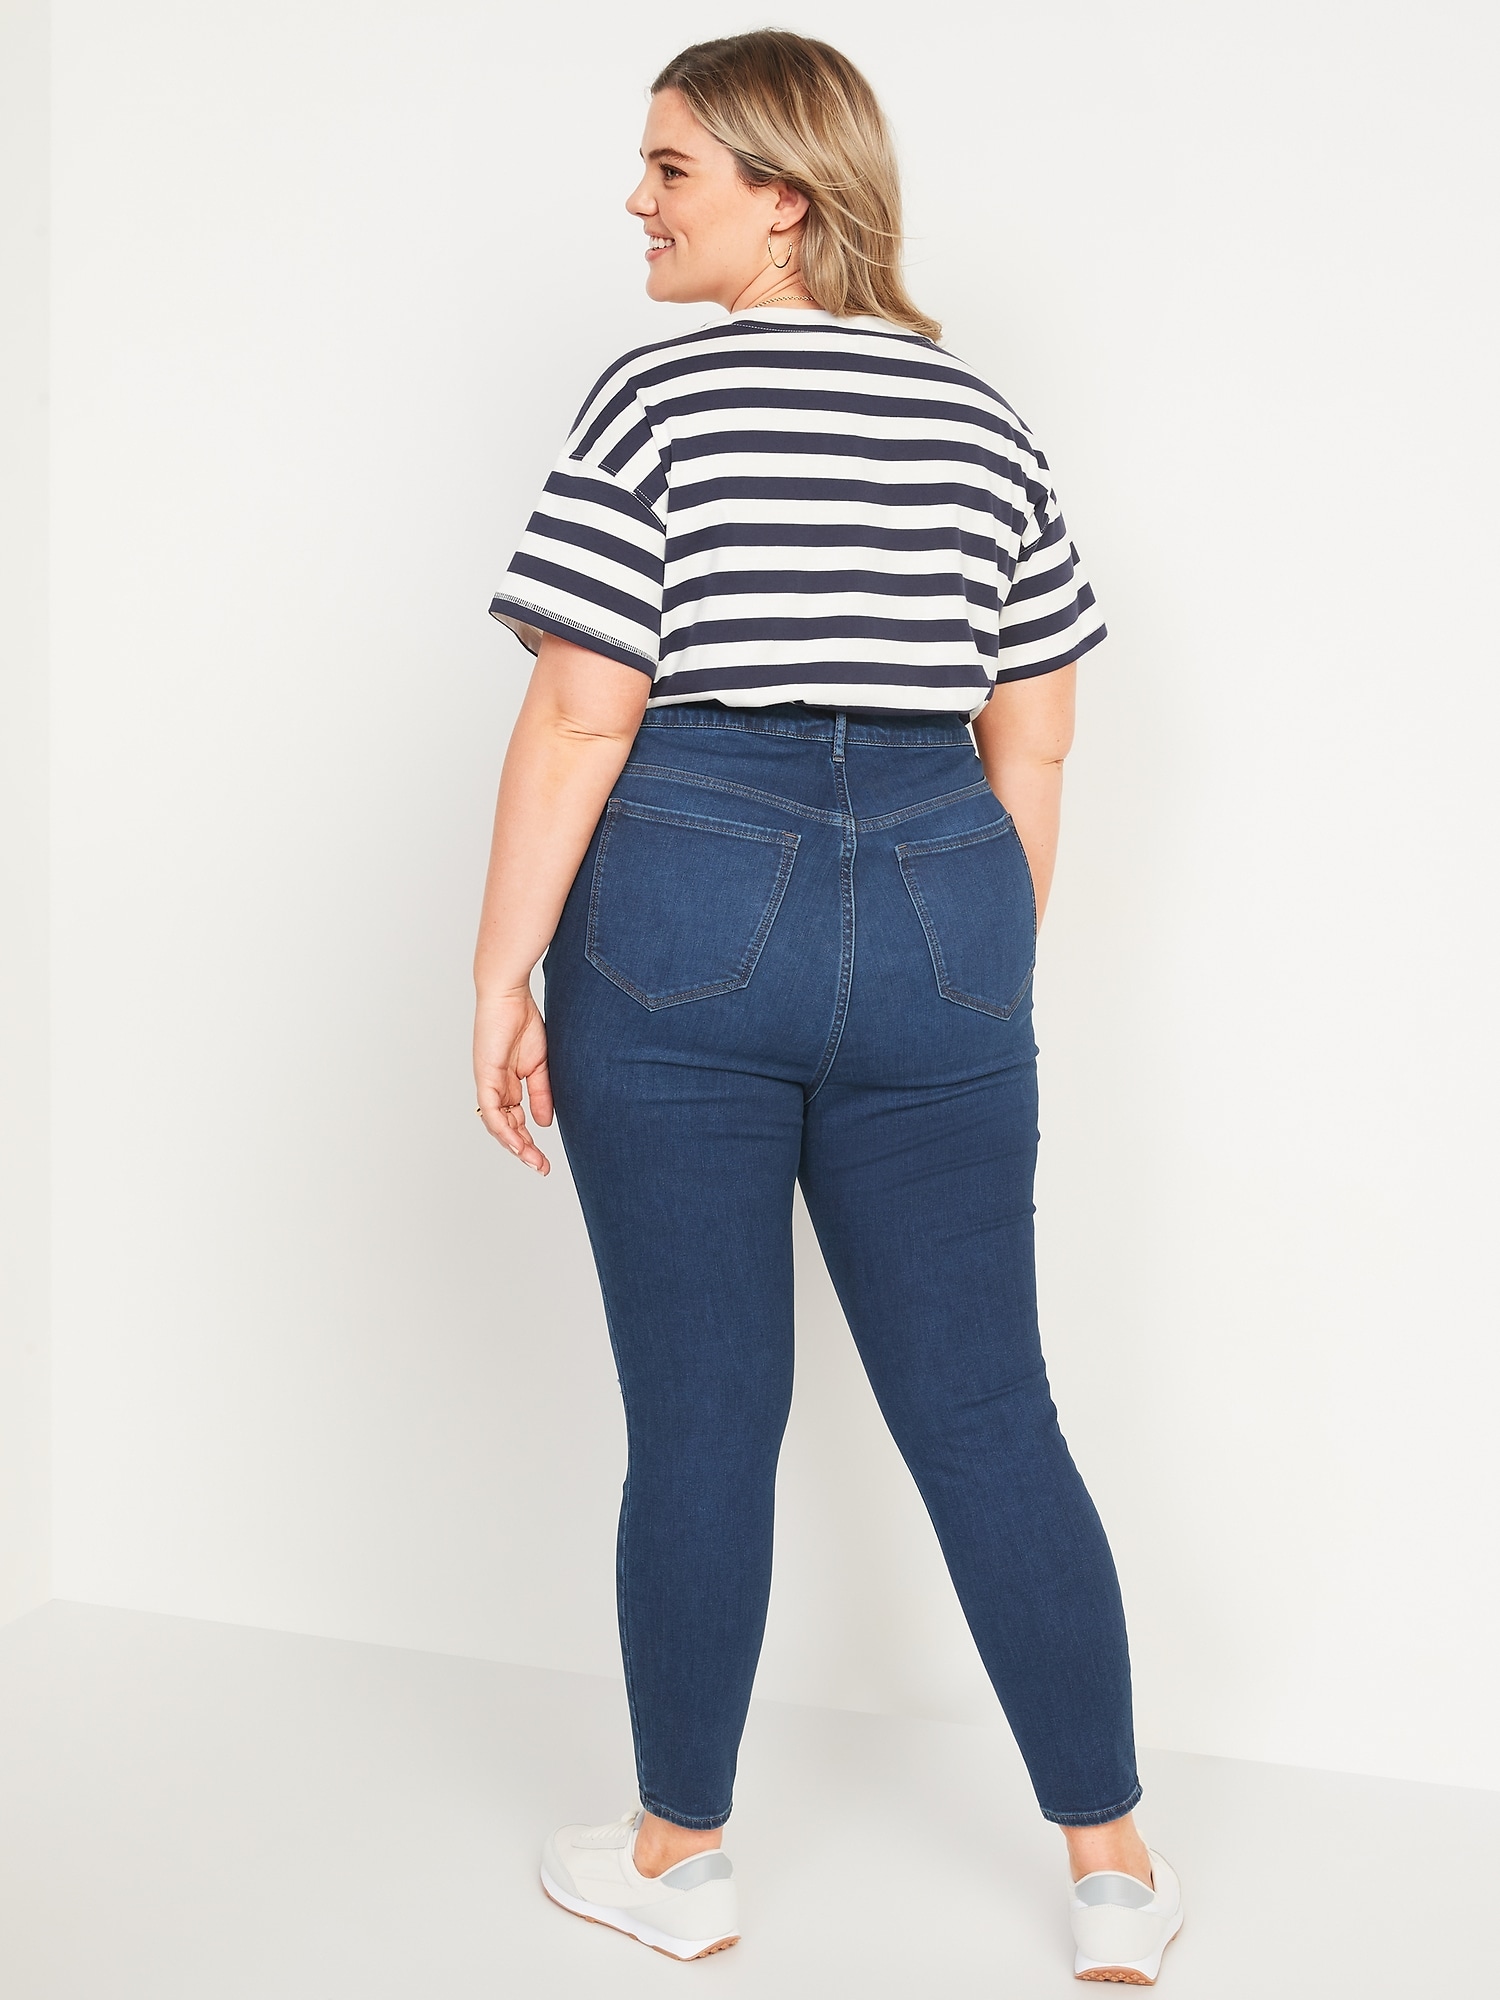 Old Navy FitsYou Women 3-Sizes-in-1 Ripped for Super-Skinny | High-Waisted Jeans Rockstar Extra